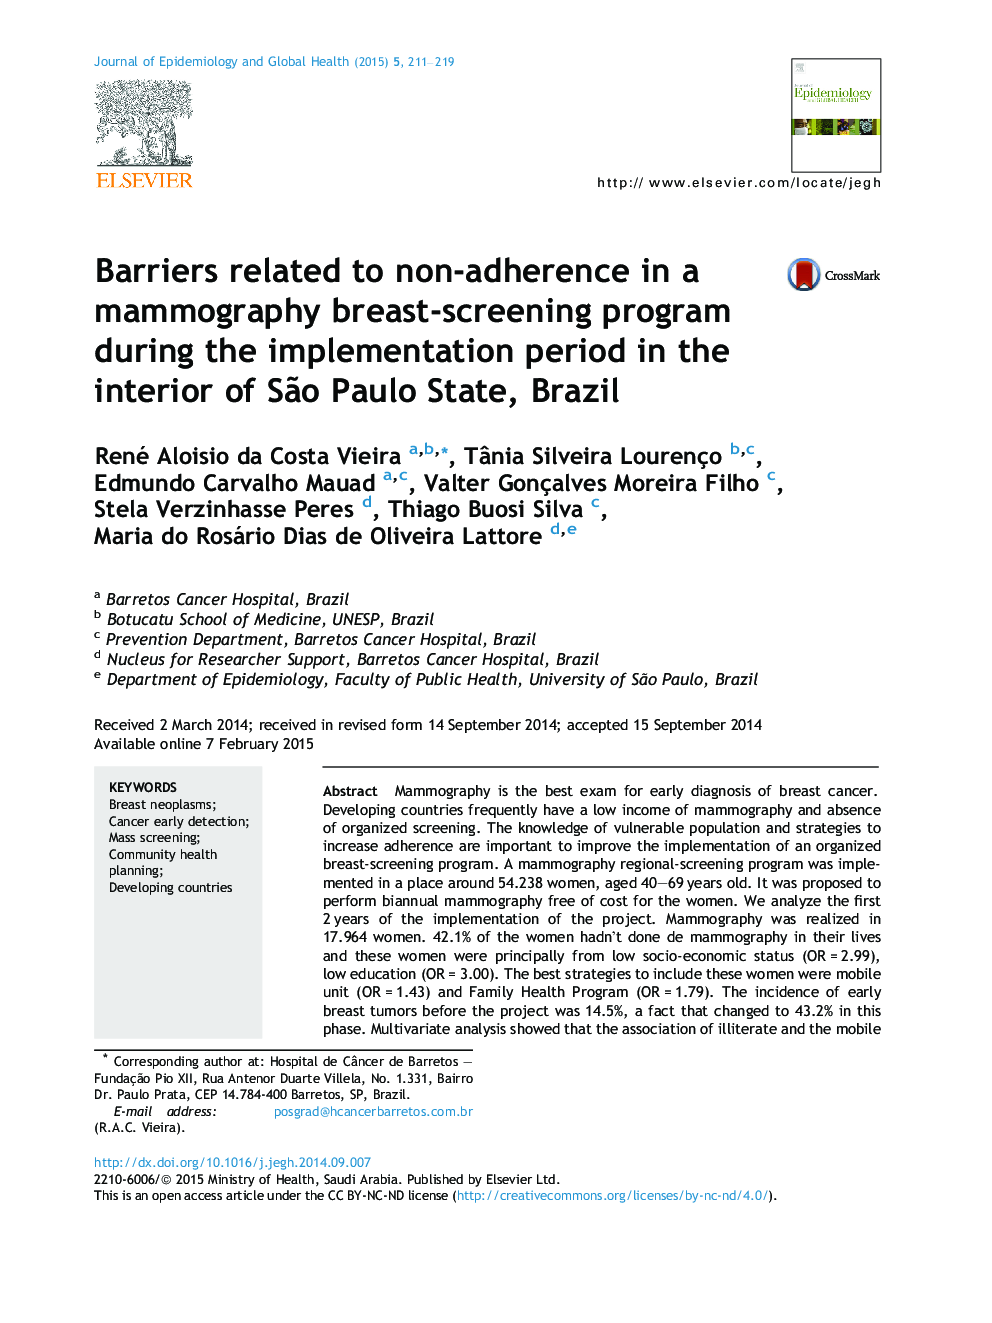 Barriers related to non-adherence in a mammography breast-screening program during the implementation period in the interior of São Paulo State, Brazil